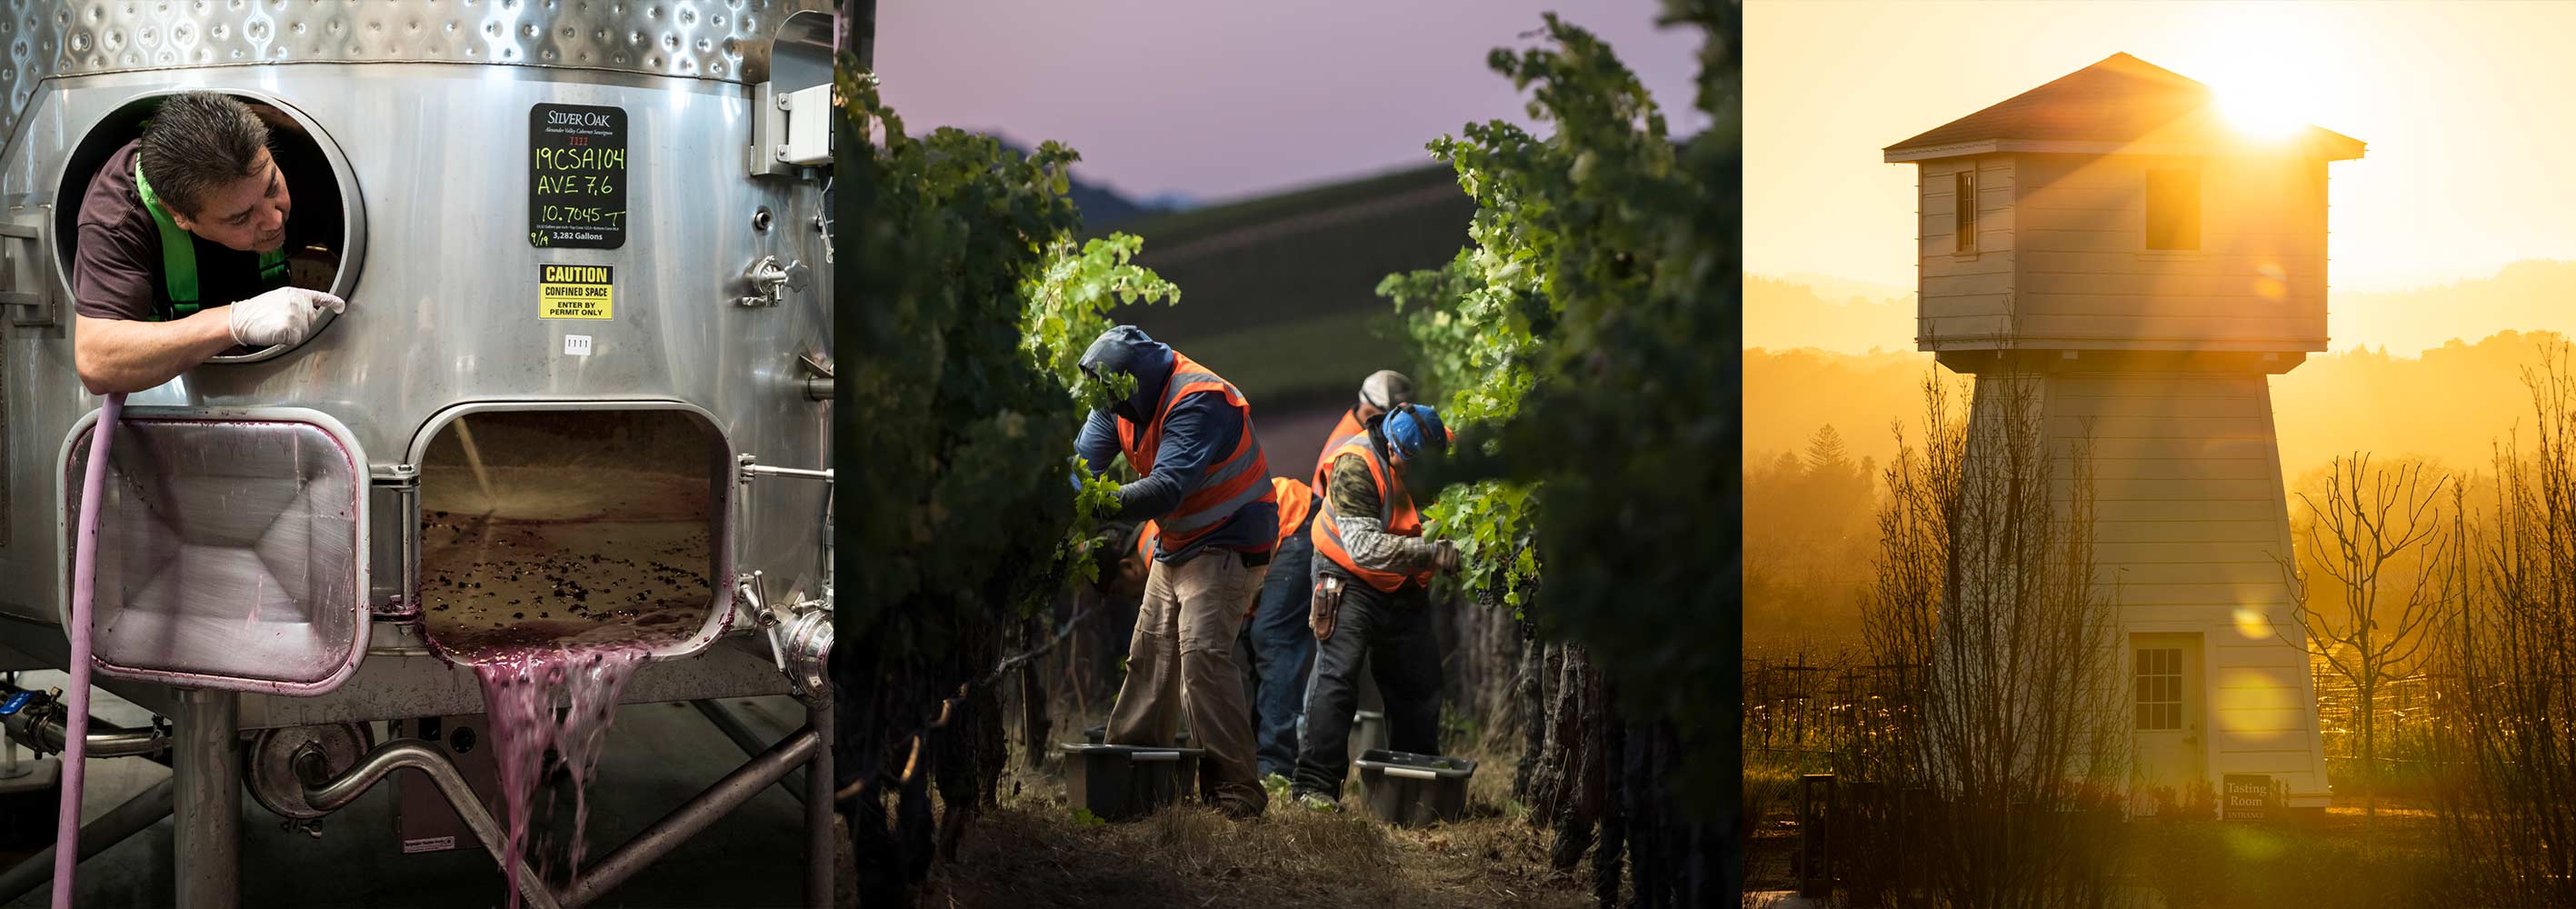 Silver Oak workers harvest grapes and prepare equipment for winemaking